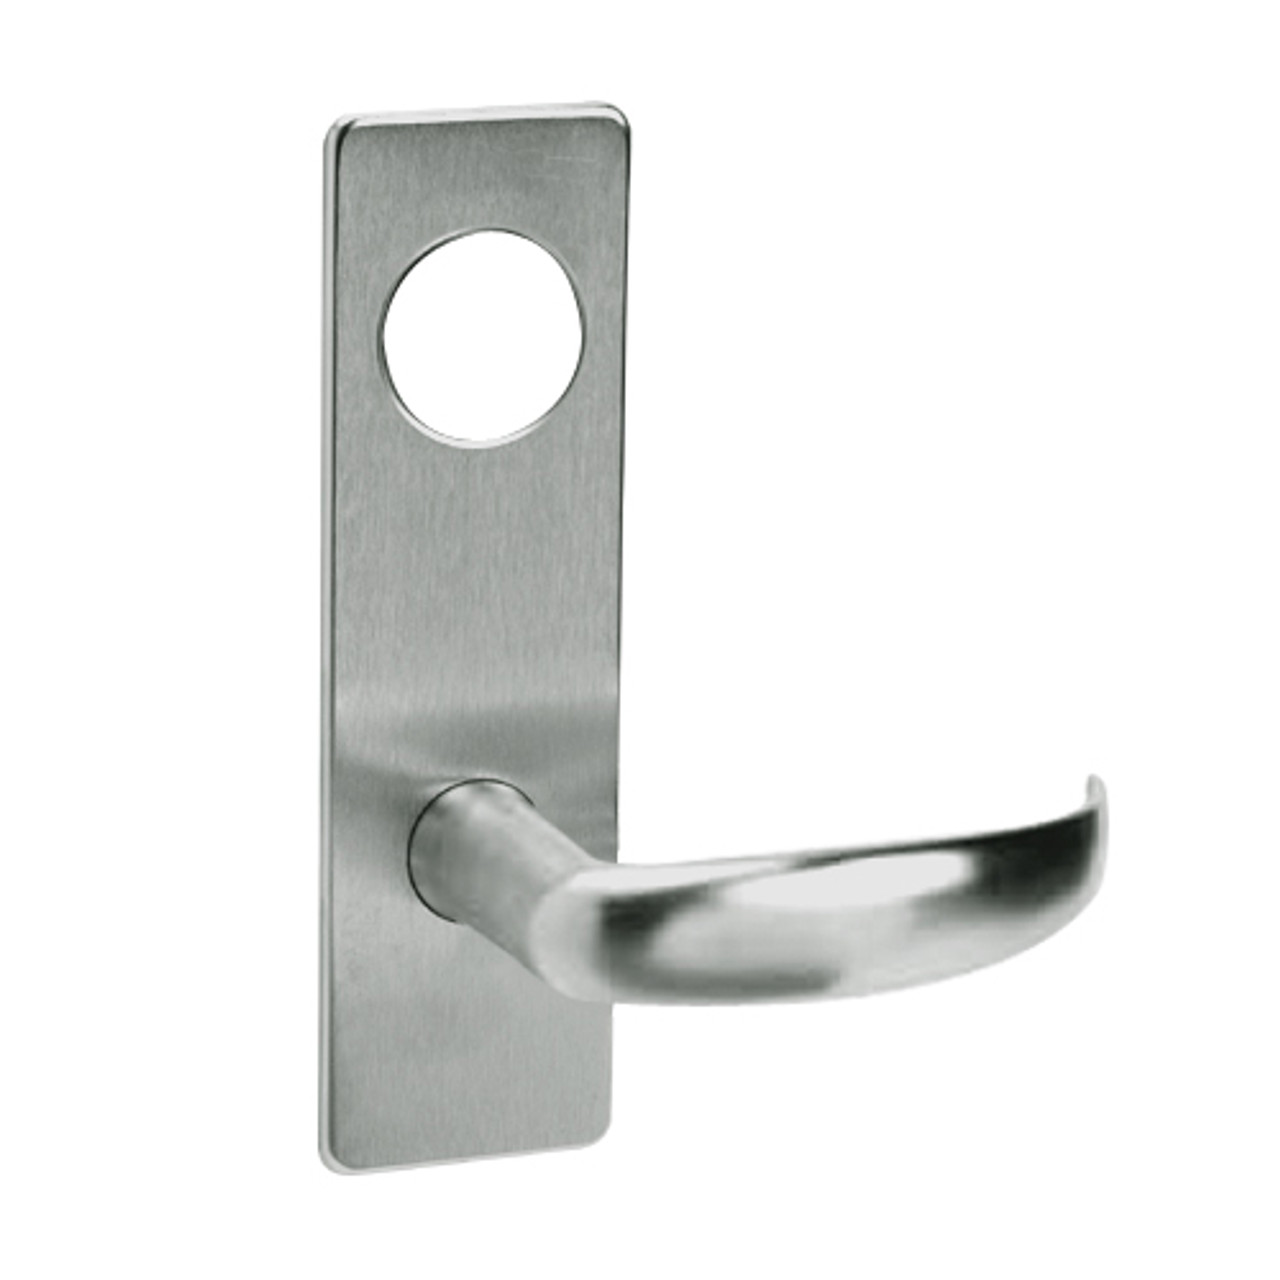 ML2058-PSM-619-CL6 Corbin Russwin ML2000 Series IC 6-Pin Less Core Mortise Entrance Holdback Locksets with Princeton Lever in Satin Nickel